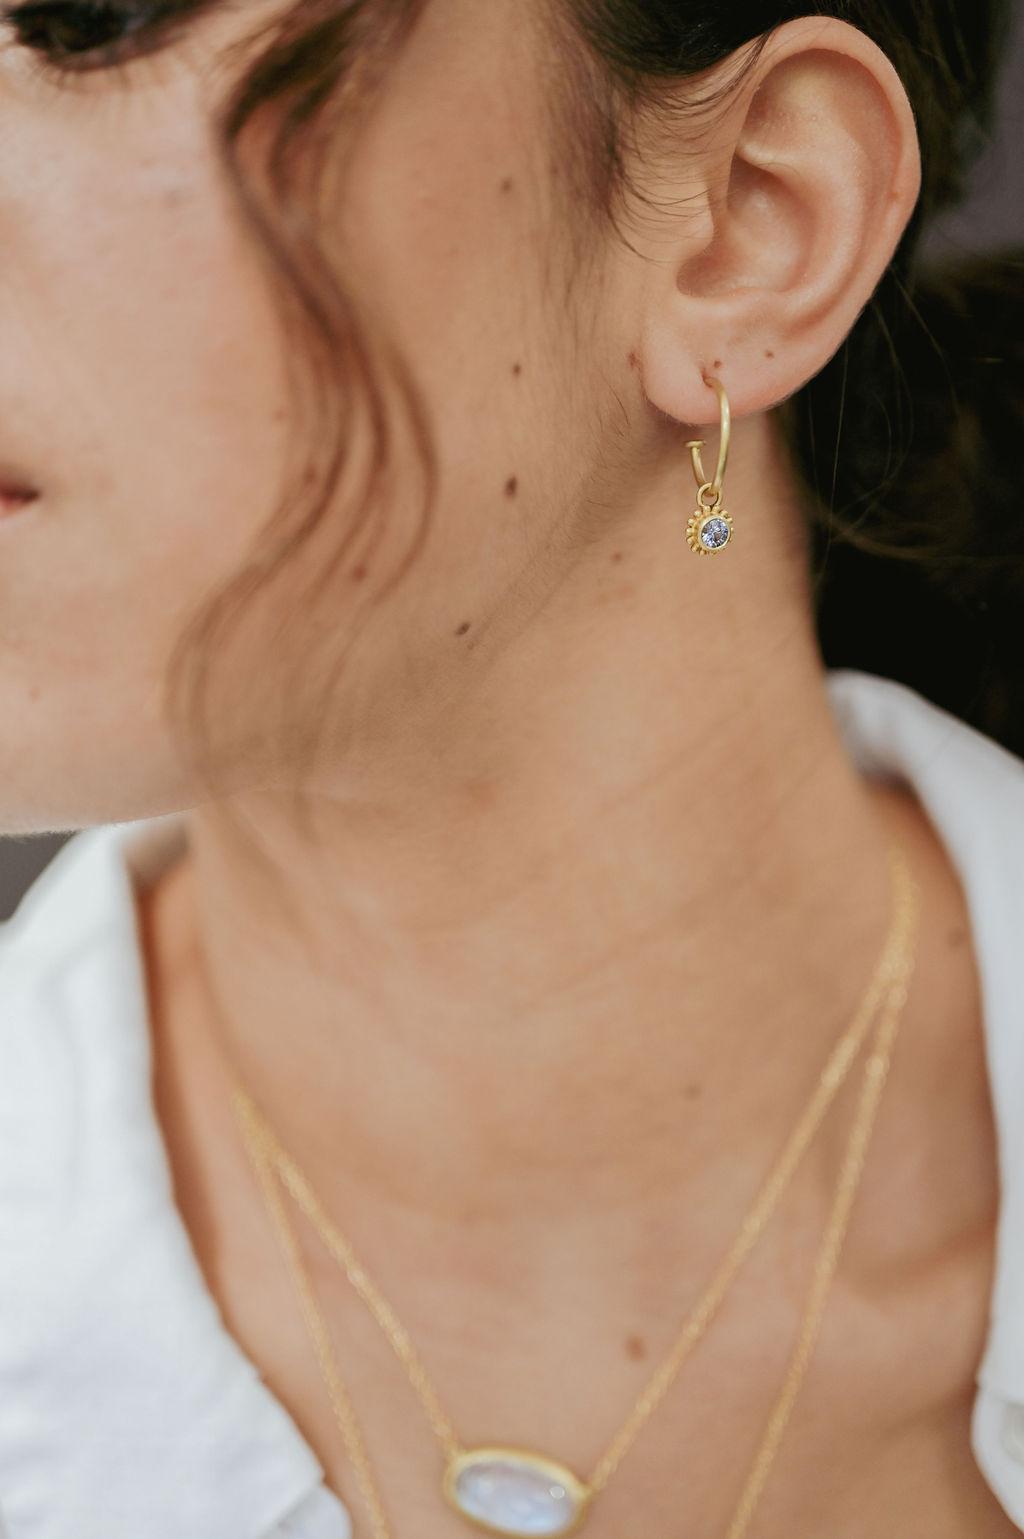 Faye Kim's must-have 18 karat gold hoops on posts. A classic look, timeless in design. Shown here with our Ceylon Blue Sapphire granulation drops to add sparkle, color, and versatility. Stylish and great for daily wear, with or without the